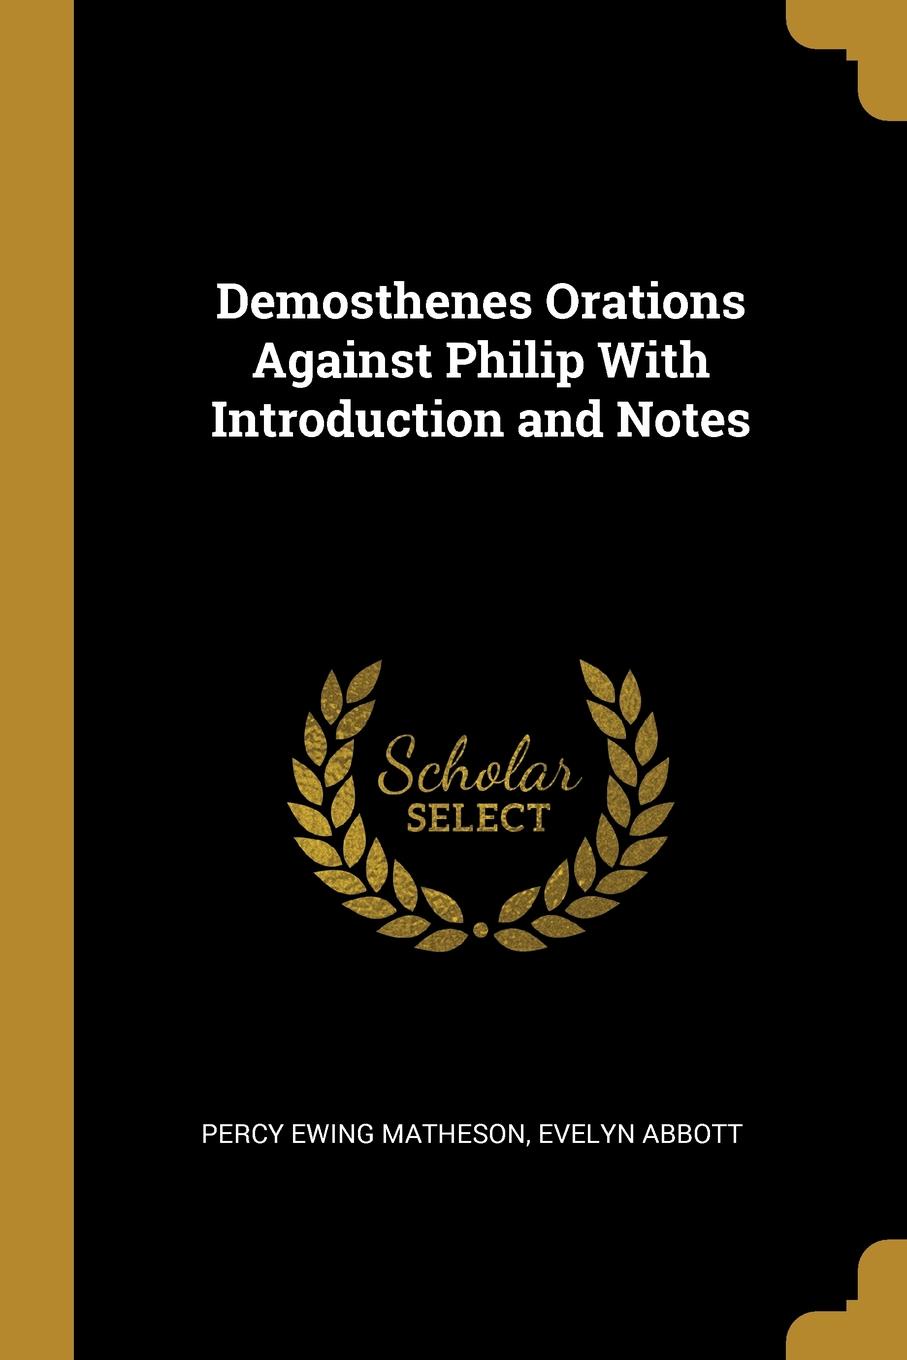 Demosthenes Orations Against Philip With Introduction and Notes